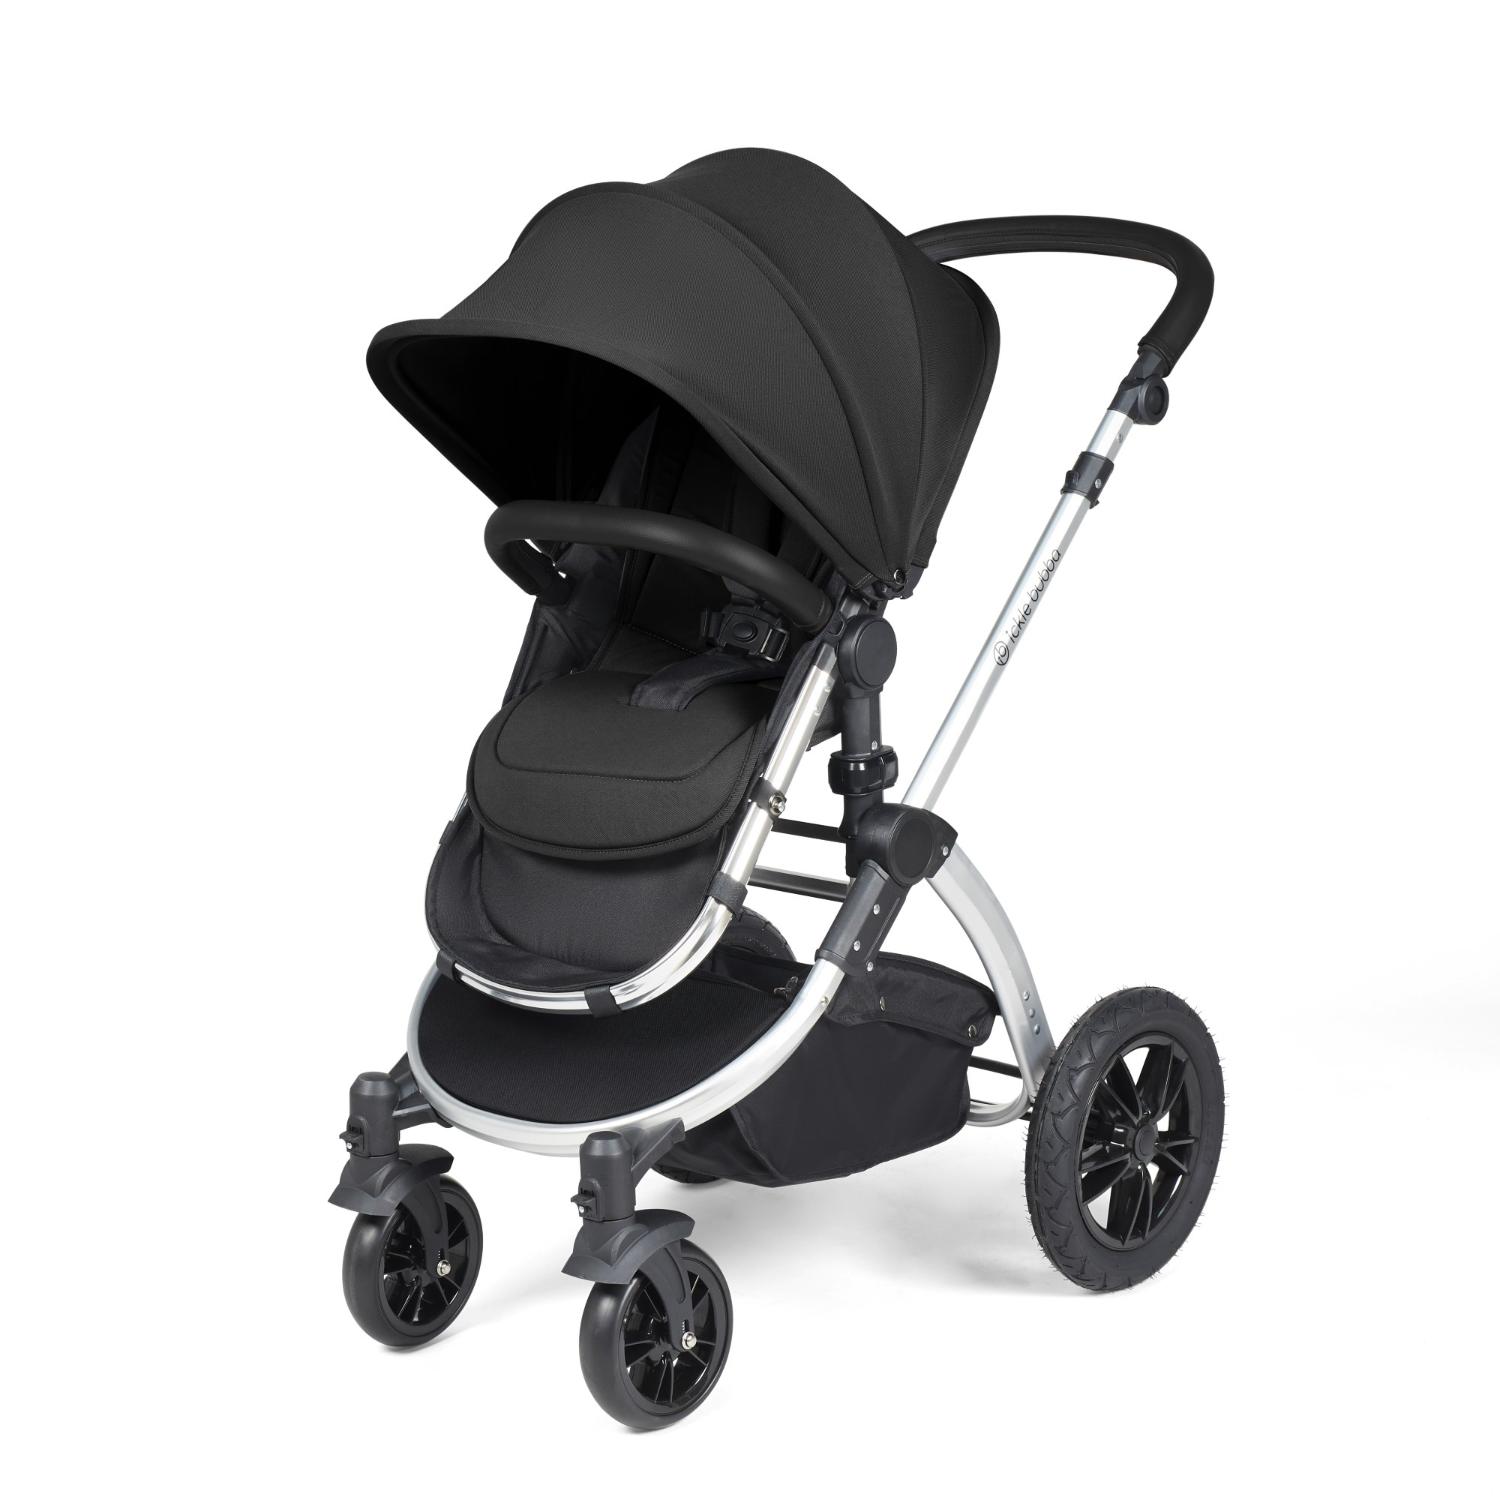 Ickle Bubba Stomp Luxe Pushchair with seat unit attached in Midnight black colour with silver chassis